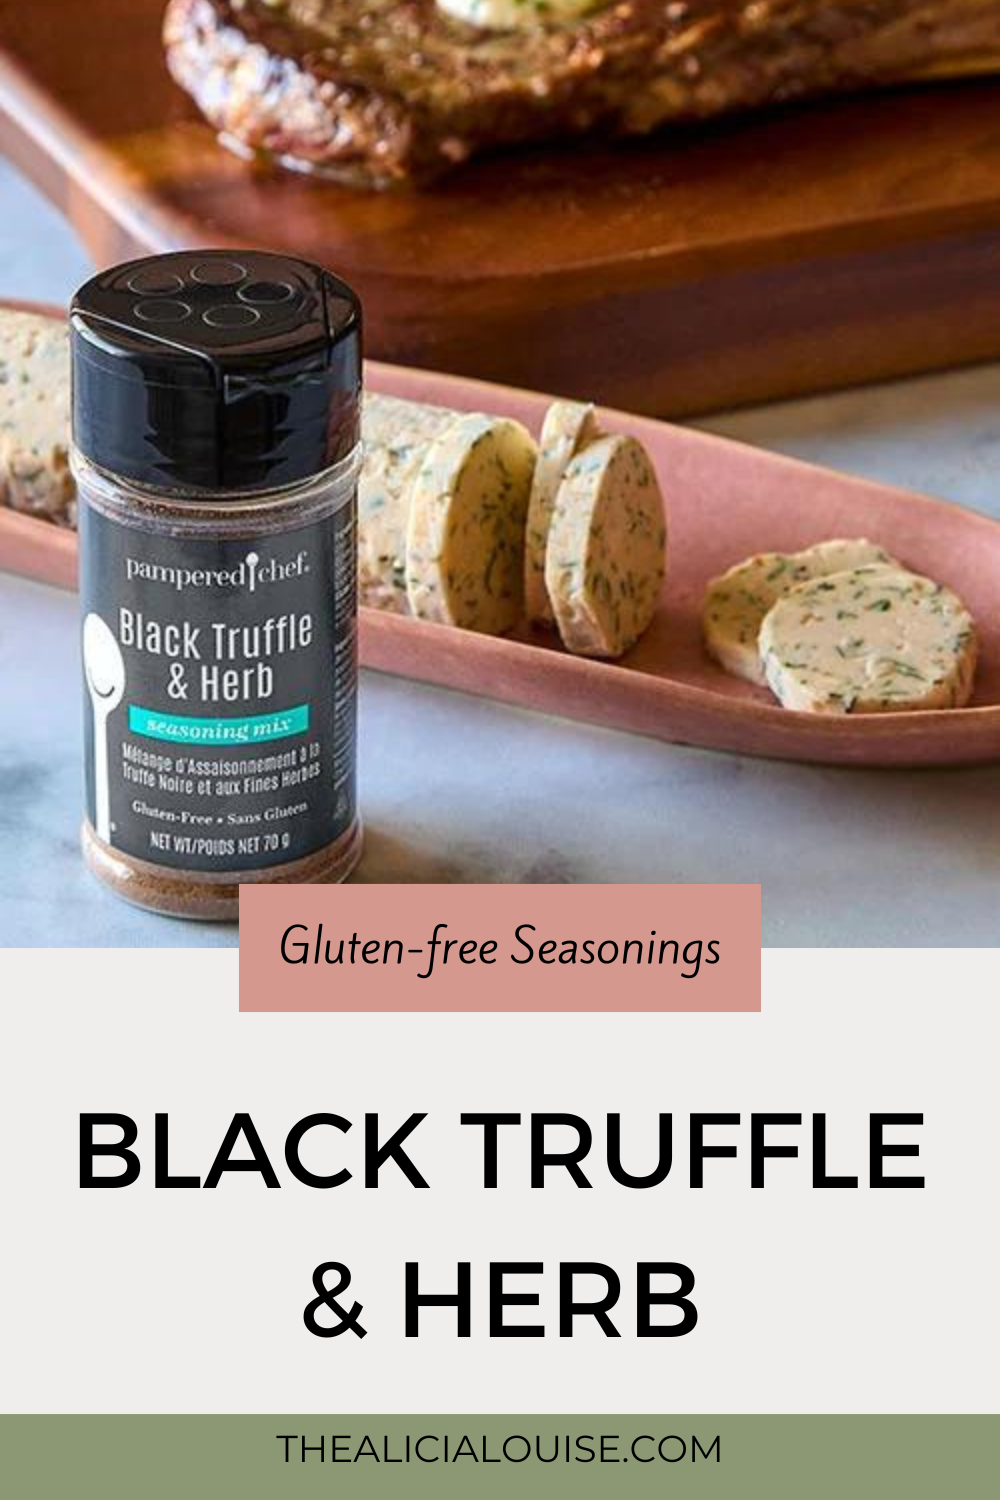 Image of Black Truffle and Herb seasoning blend. The label describes a mix of black truffles, garlic, basil, tarragon, parsley, and chives. Suggested uses include enhancing the flavor of pizza, popcorn, mac ‘n cheese, fries, meat, and veggies.